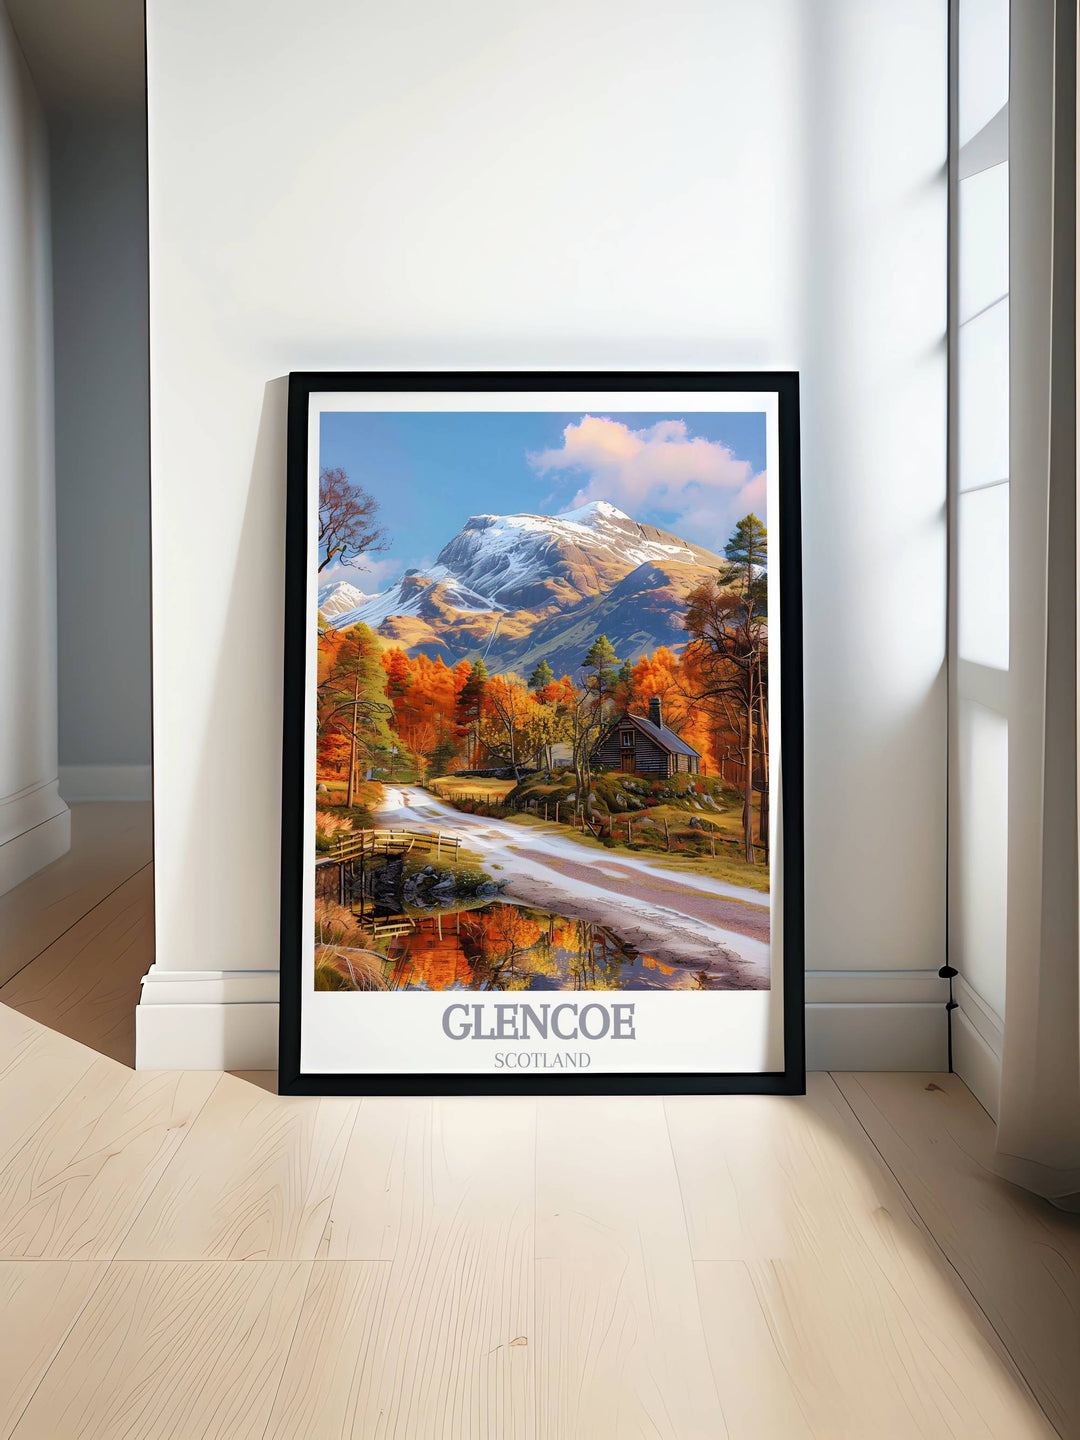 Create a description for a listing. having 3 subheadings. 300 words long. the name of our store is MapYourDreams. the keywords to guide you in creating the description are: Glencoe Travel Print, Wall Art Glencoe,Glencoe Gift Art , Lovers Scotland Art , Glencoe Travel Artwork, Glencoe Scottish, western Scotland